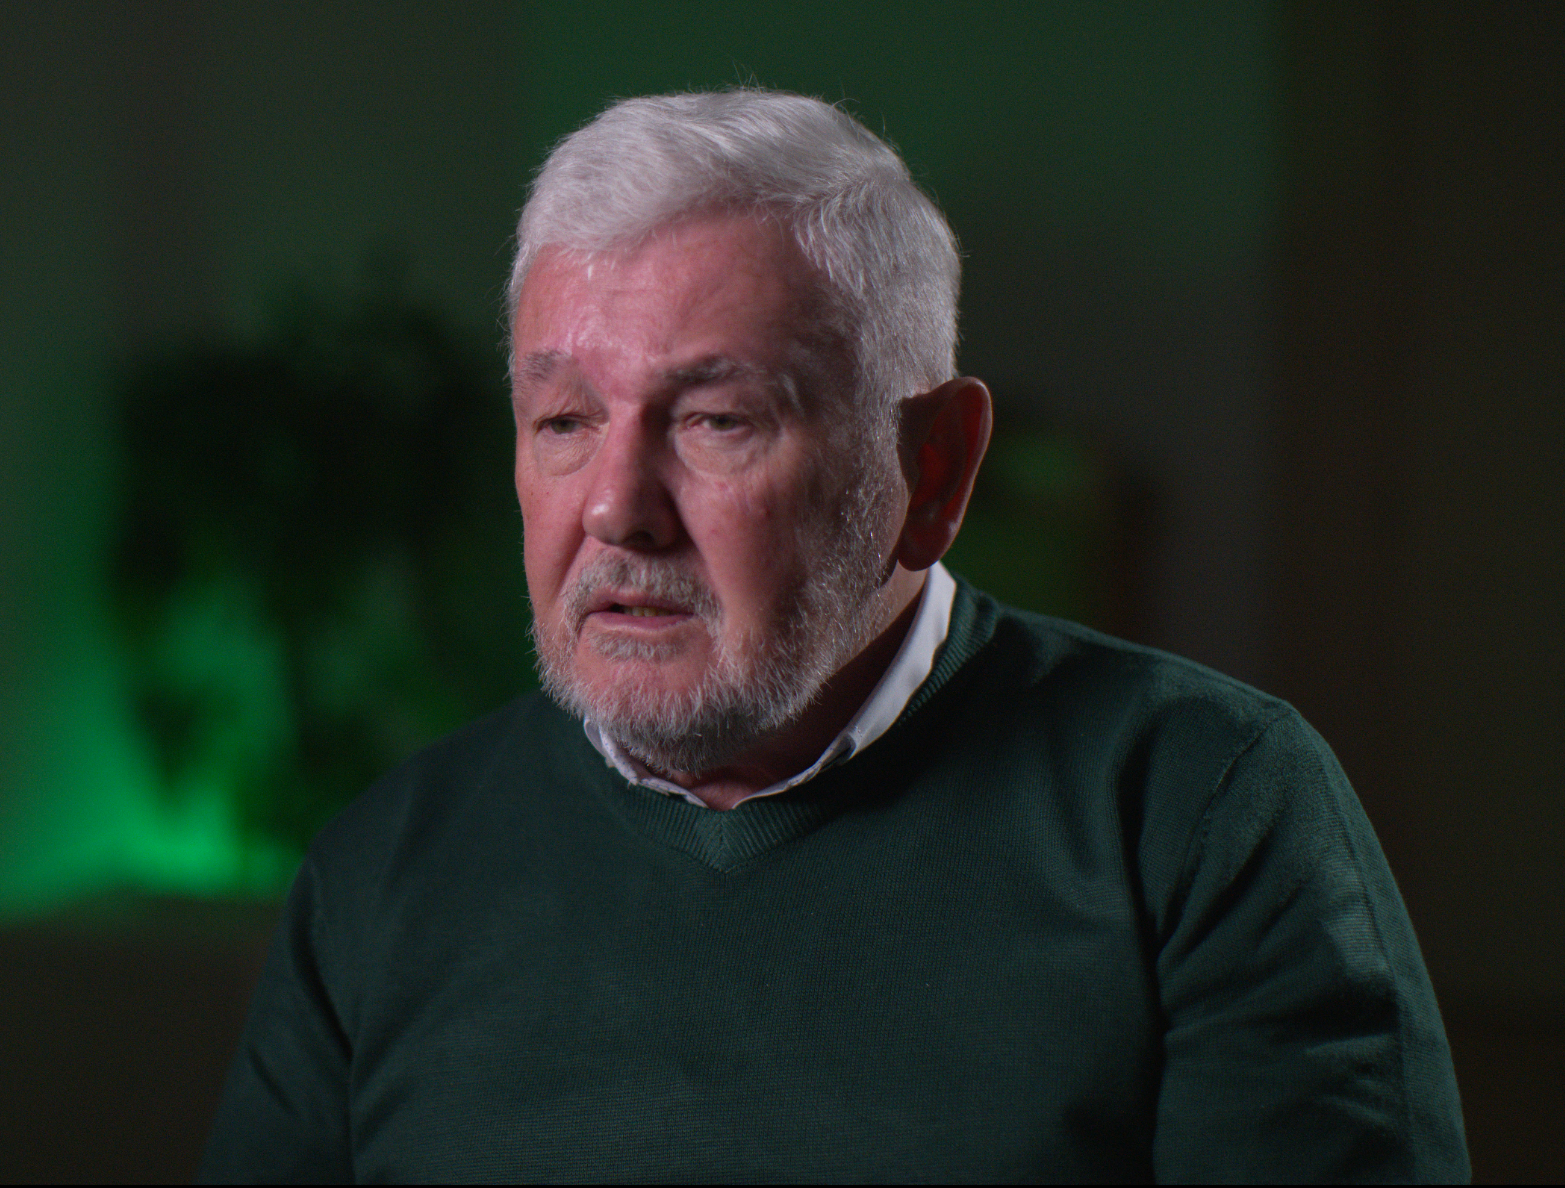 John Gilligan is seen in 'Confessions of a Crime Boss'.